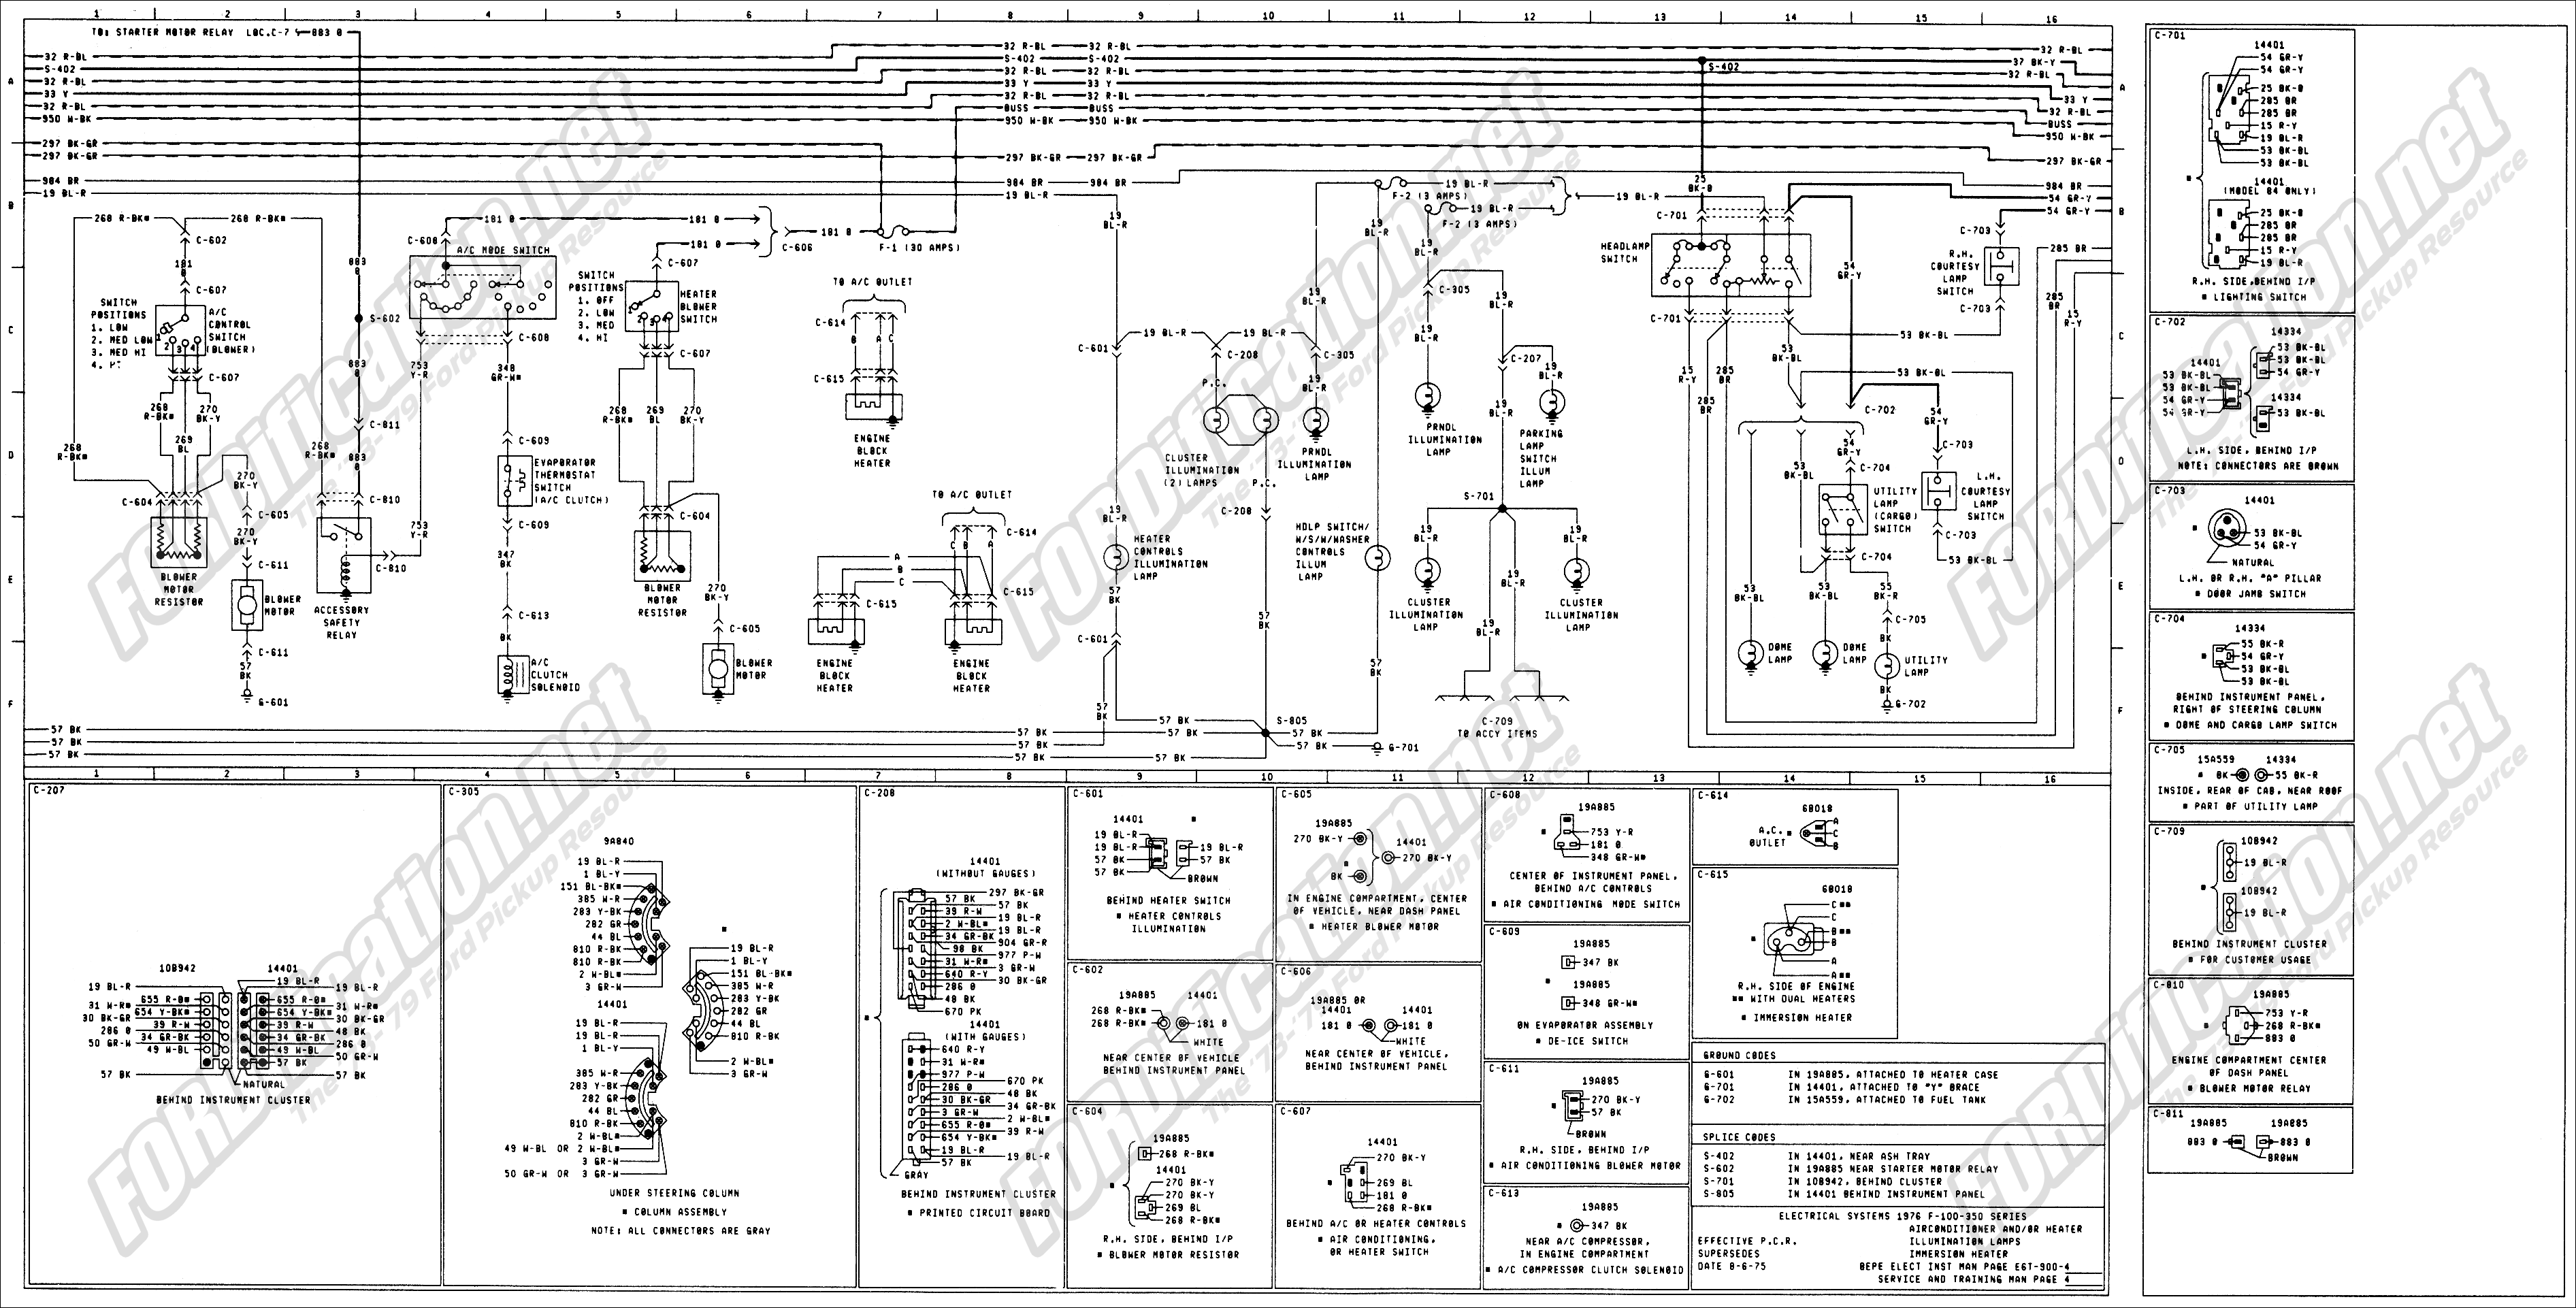 1973-1979 Ford Truck Wiring Diagrams & Schematics - FORDification.net